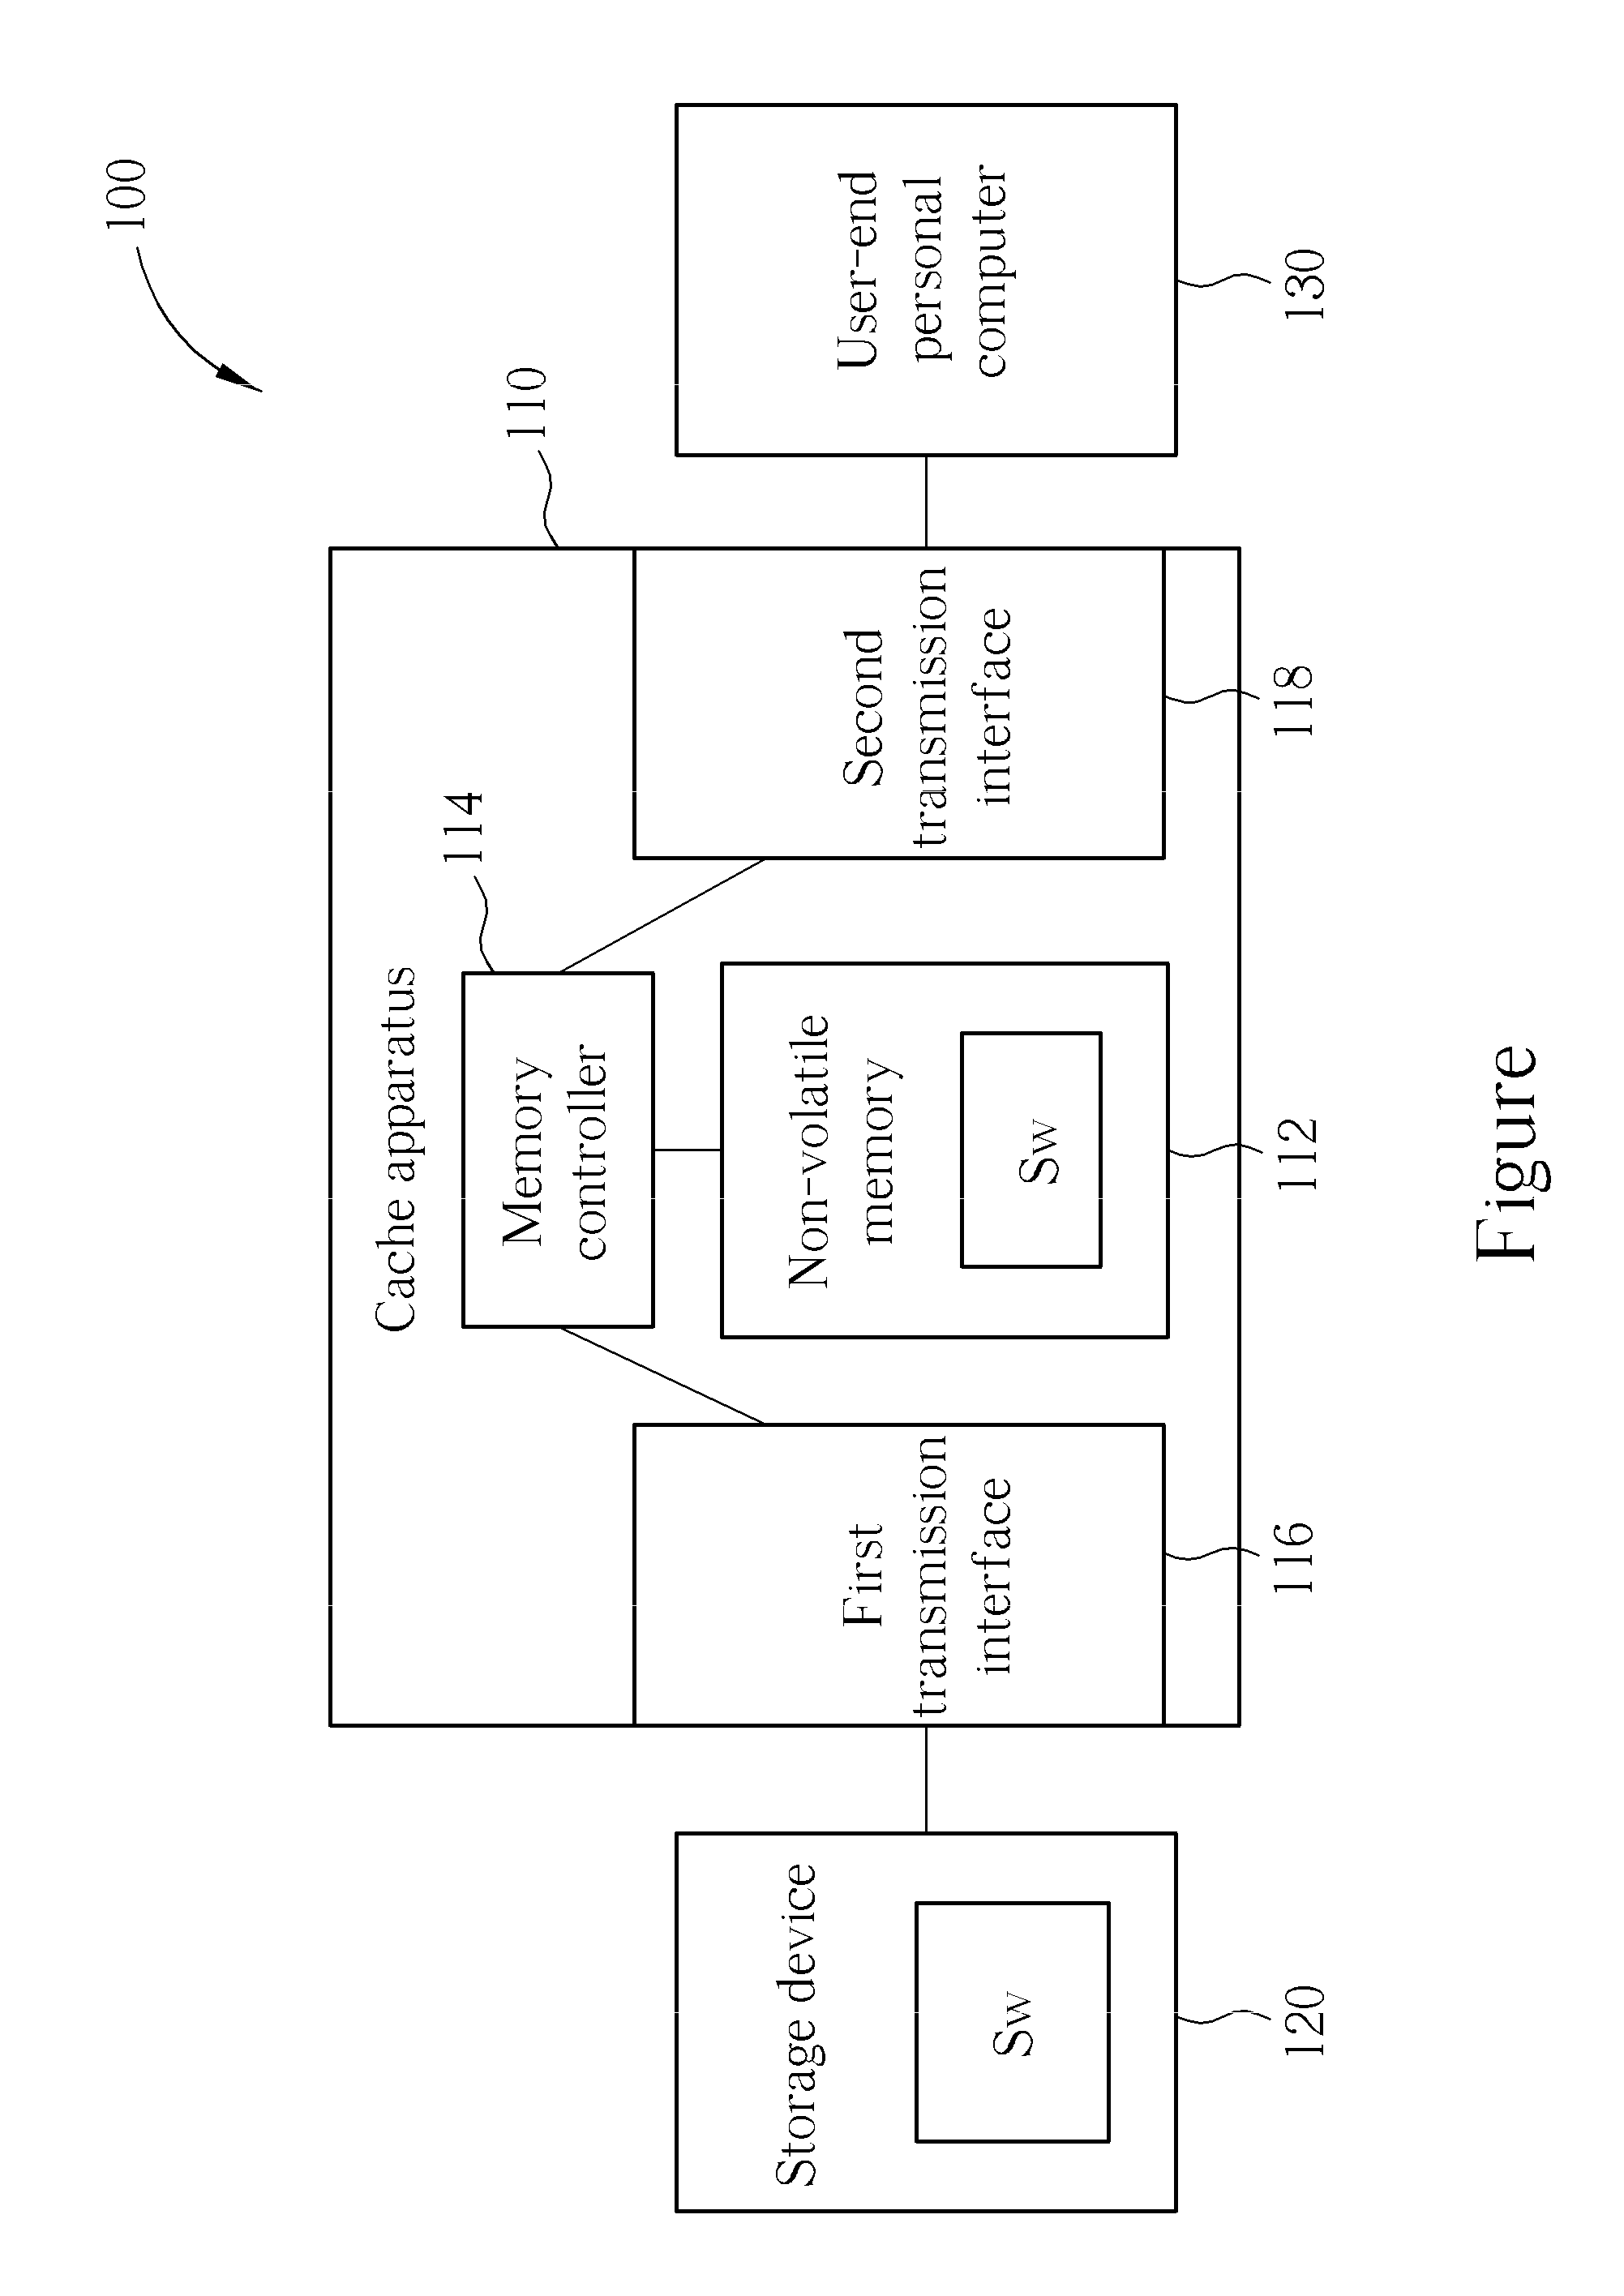 Cache apparatus for increasing data accessing speed of storage device